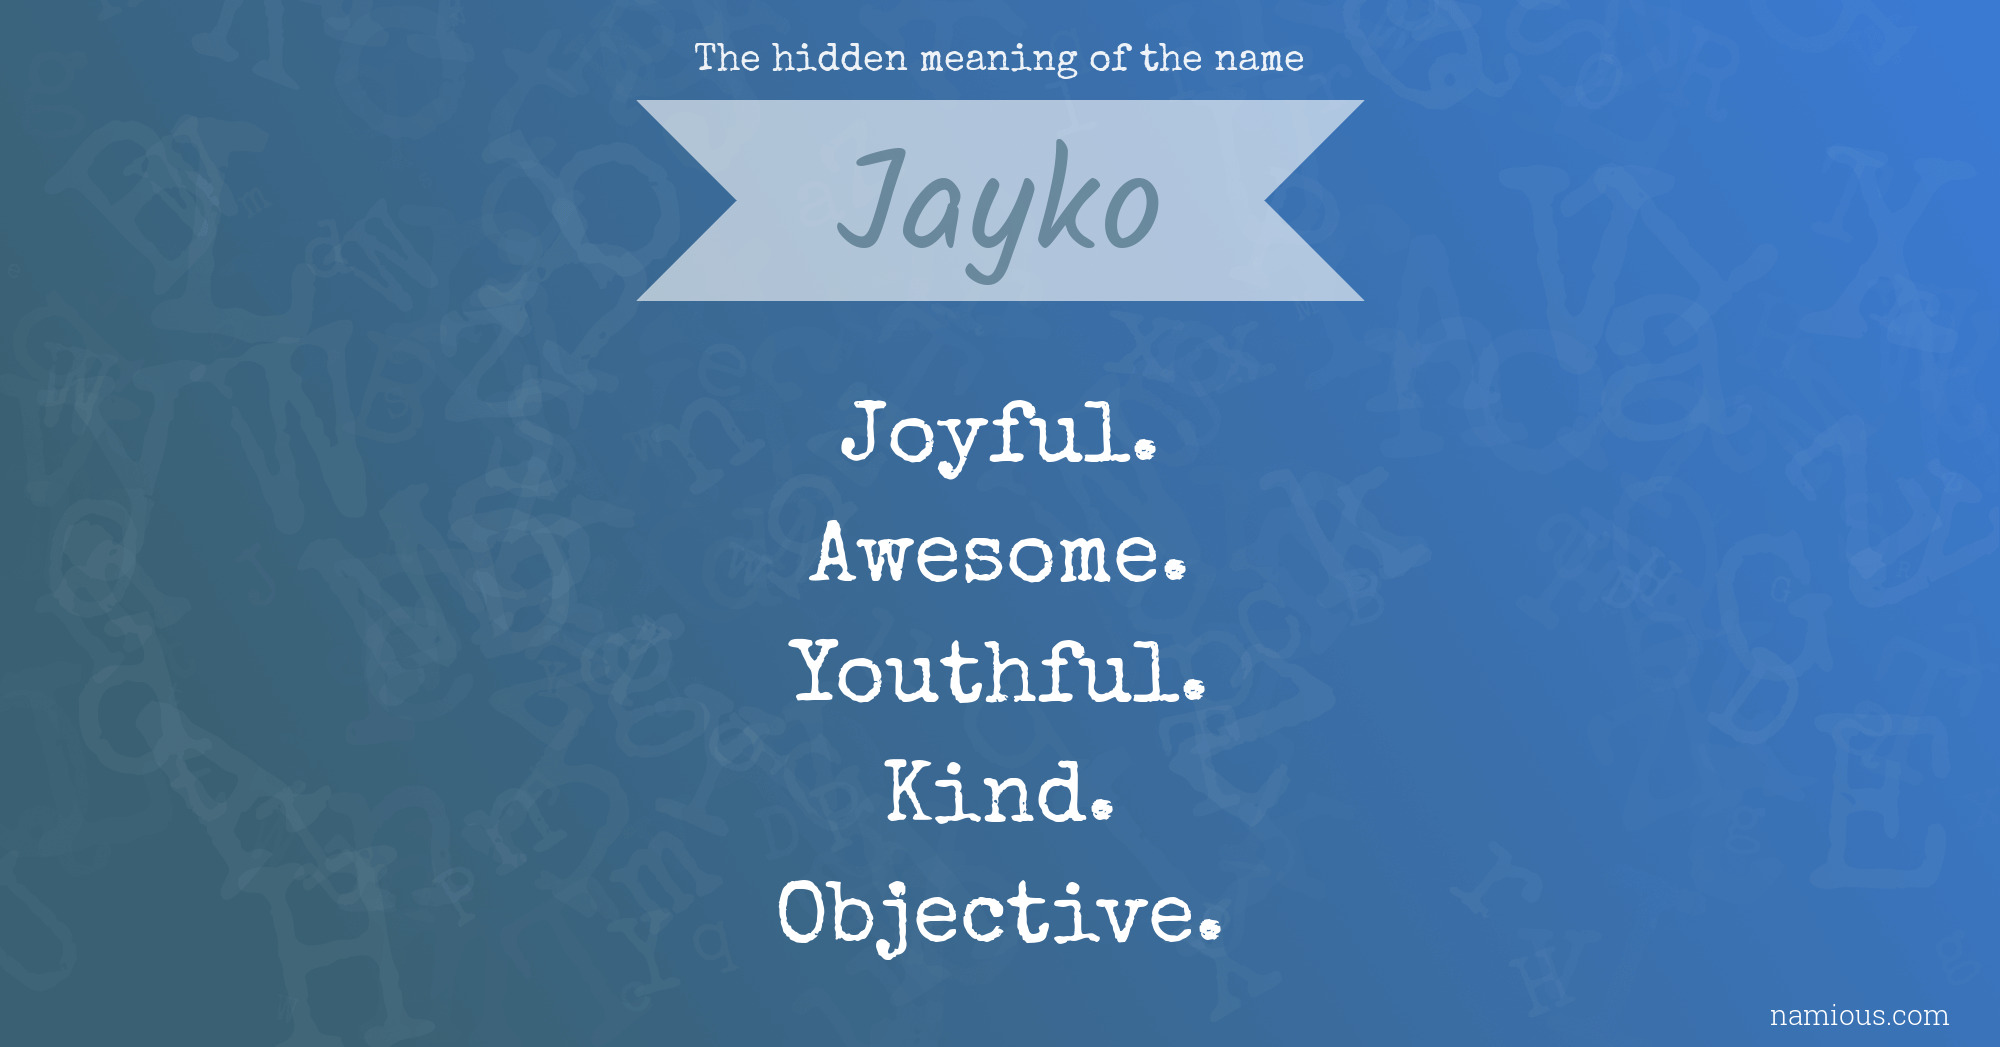 The hidden meaning of the name Jayko